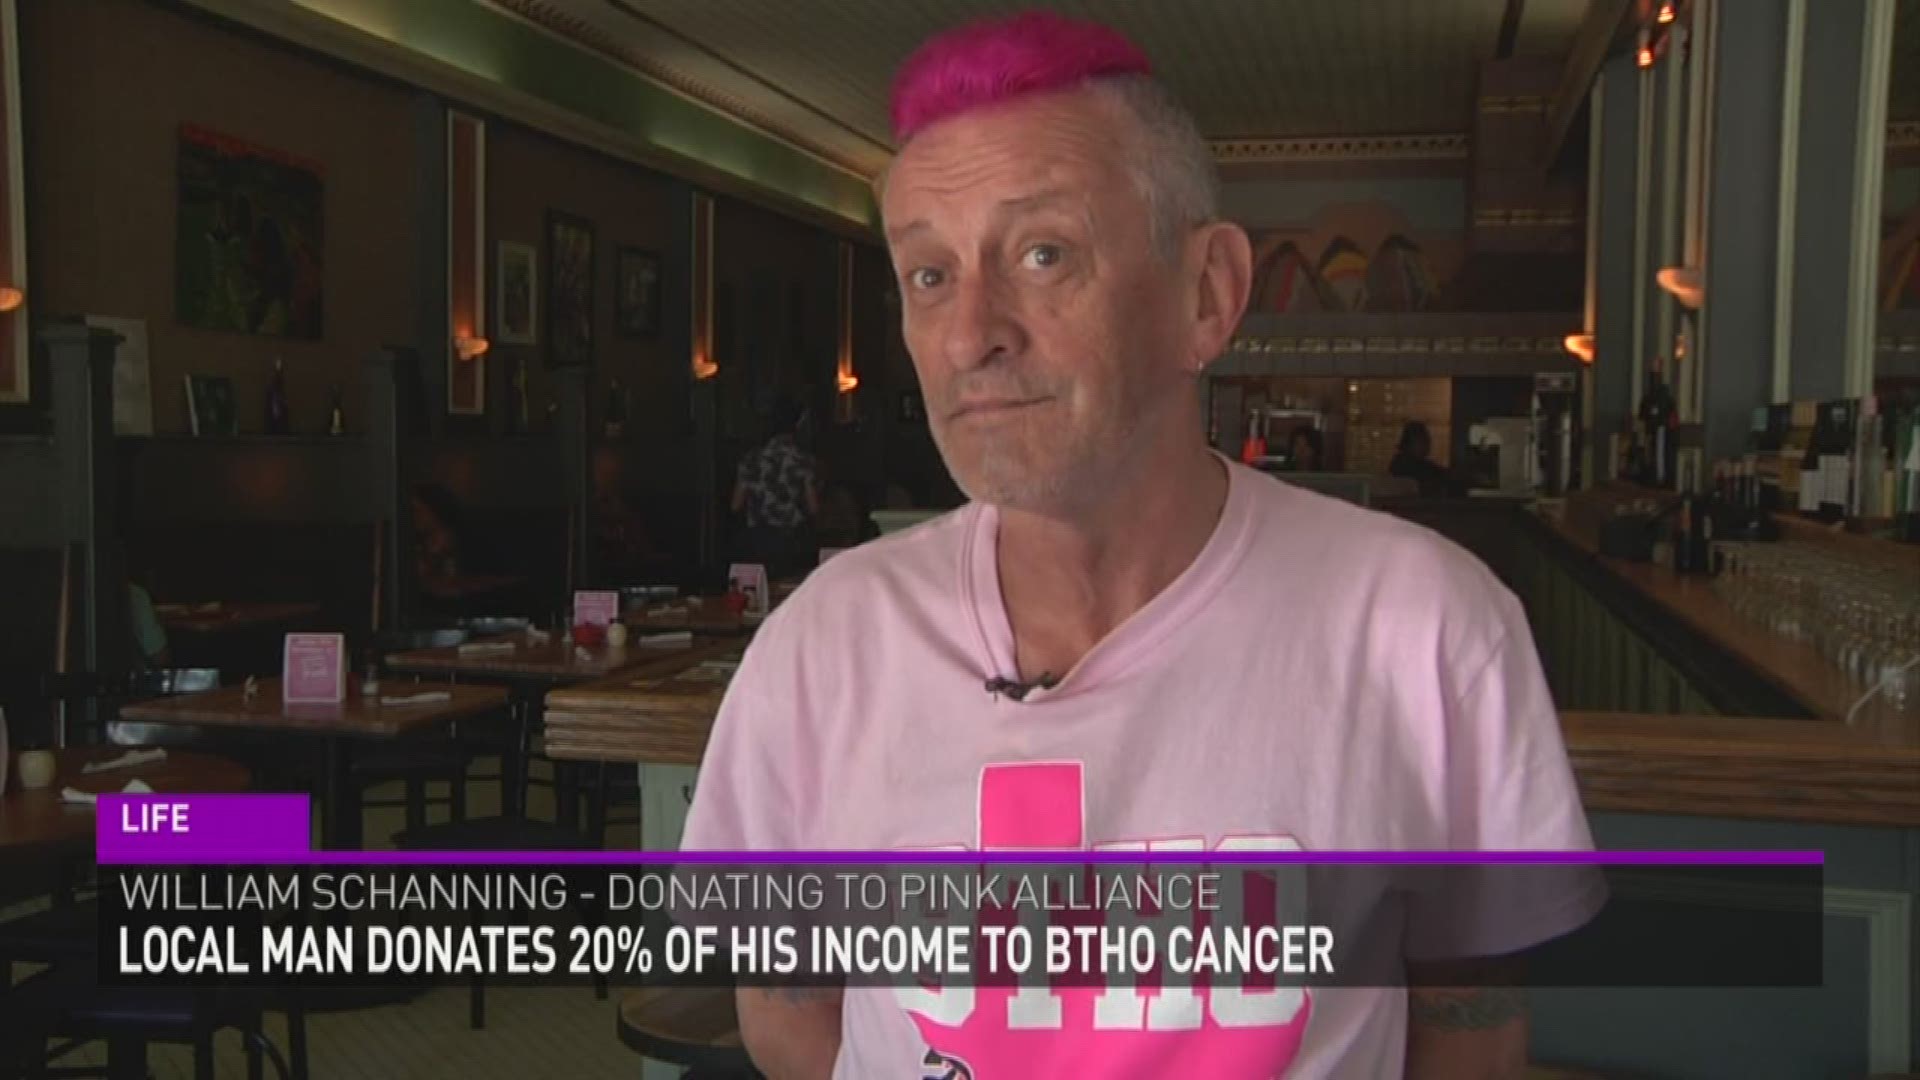 Local waiter is donating part of his income to local breast cancer organization. 